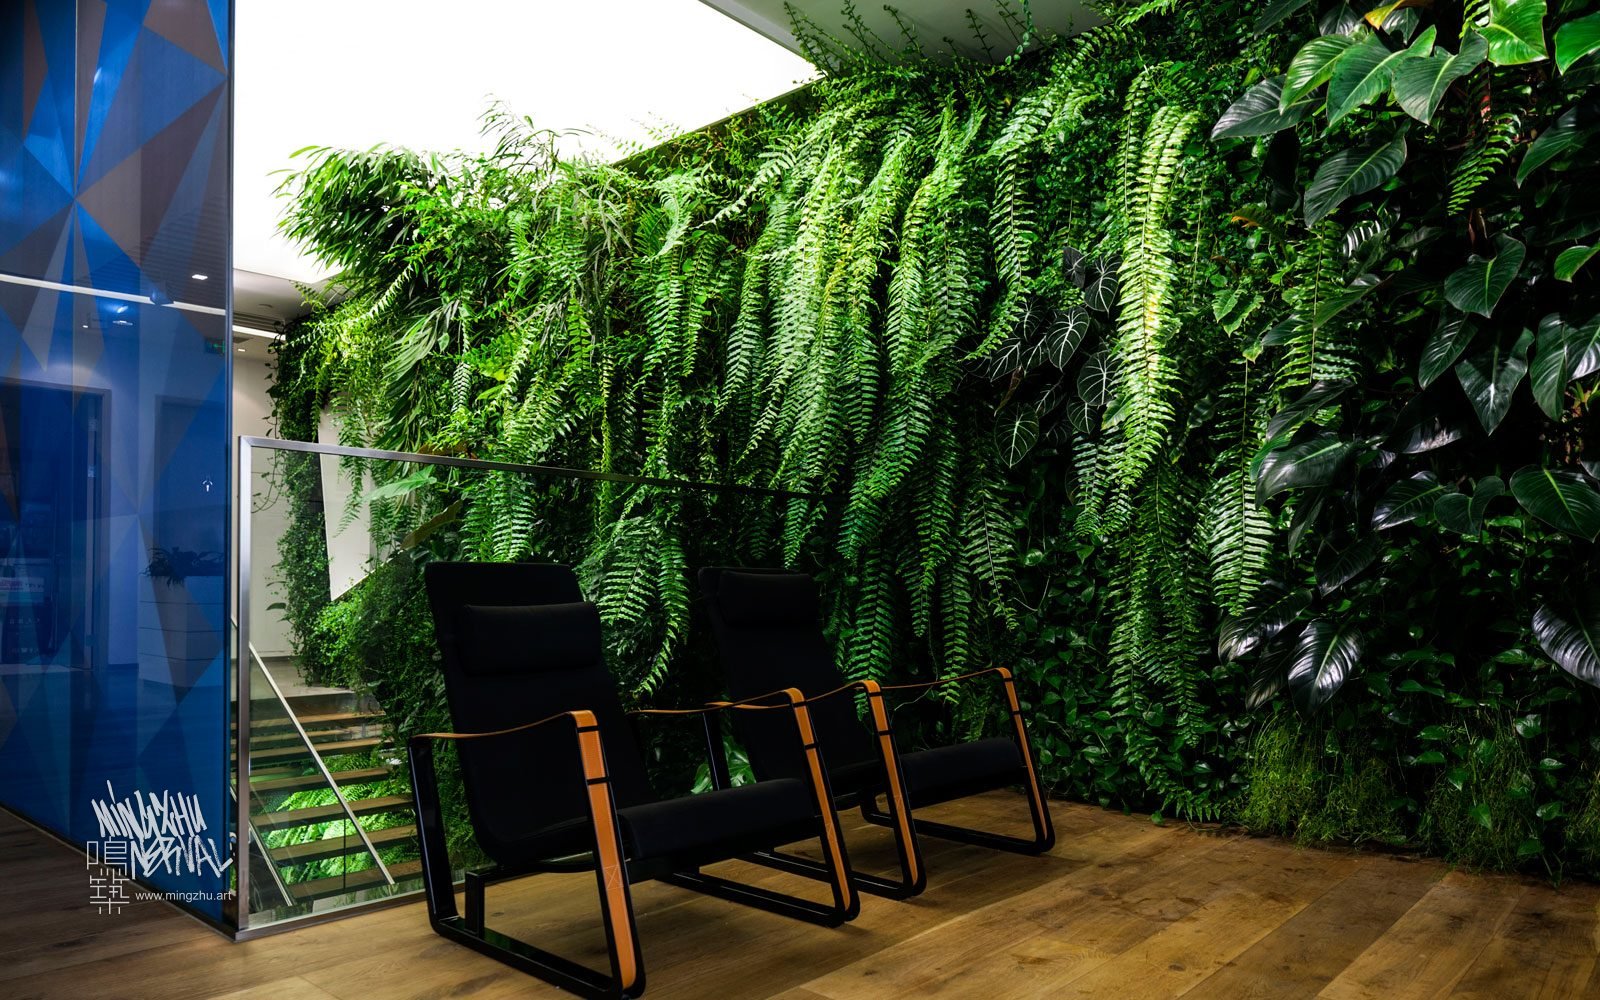 At Mingzhu Nerval, we thrive at creating the most beautiful vertical gardens in the world. For Dentsu Aegis, we created a terrific living wall design - Shanghai, 2016.